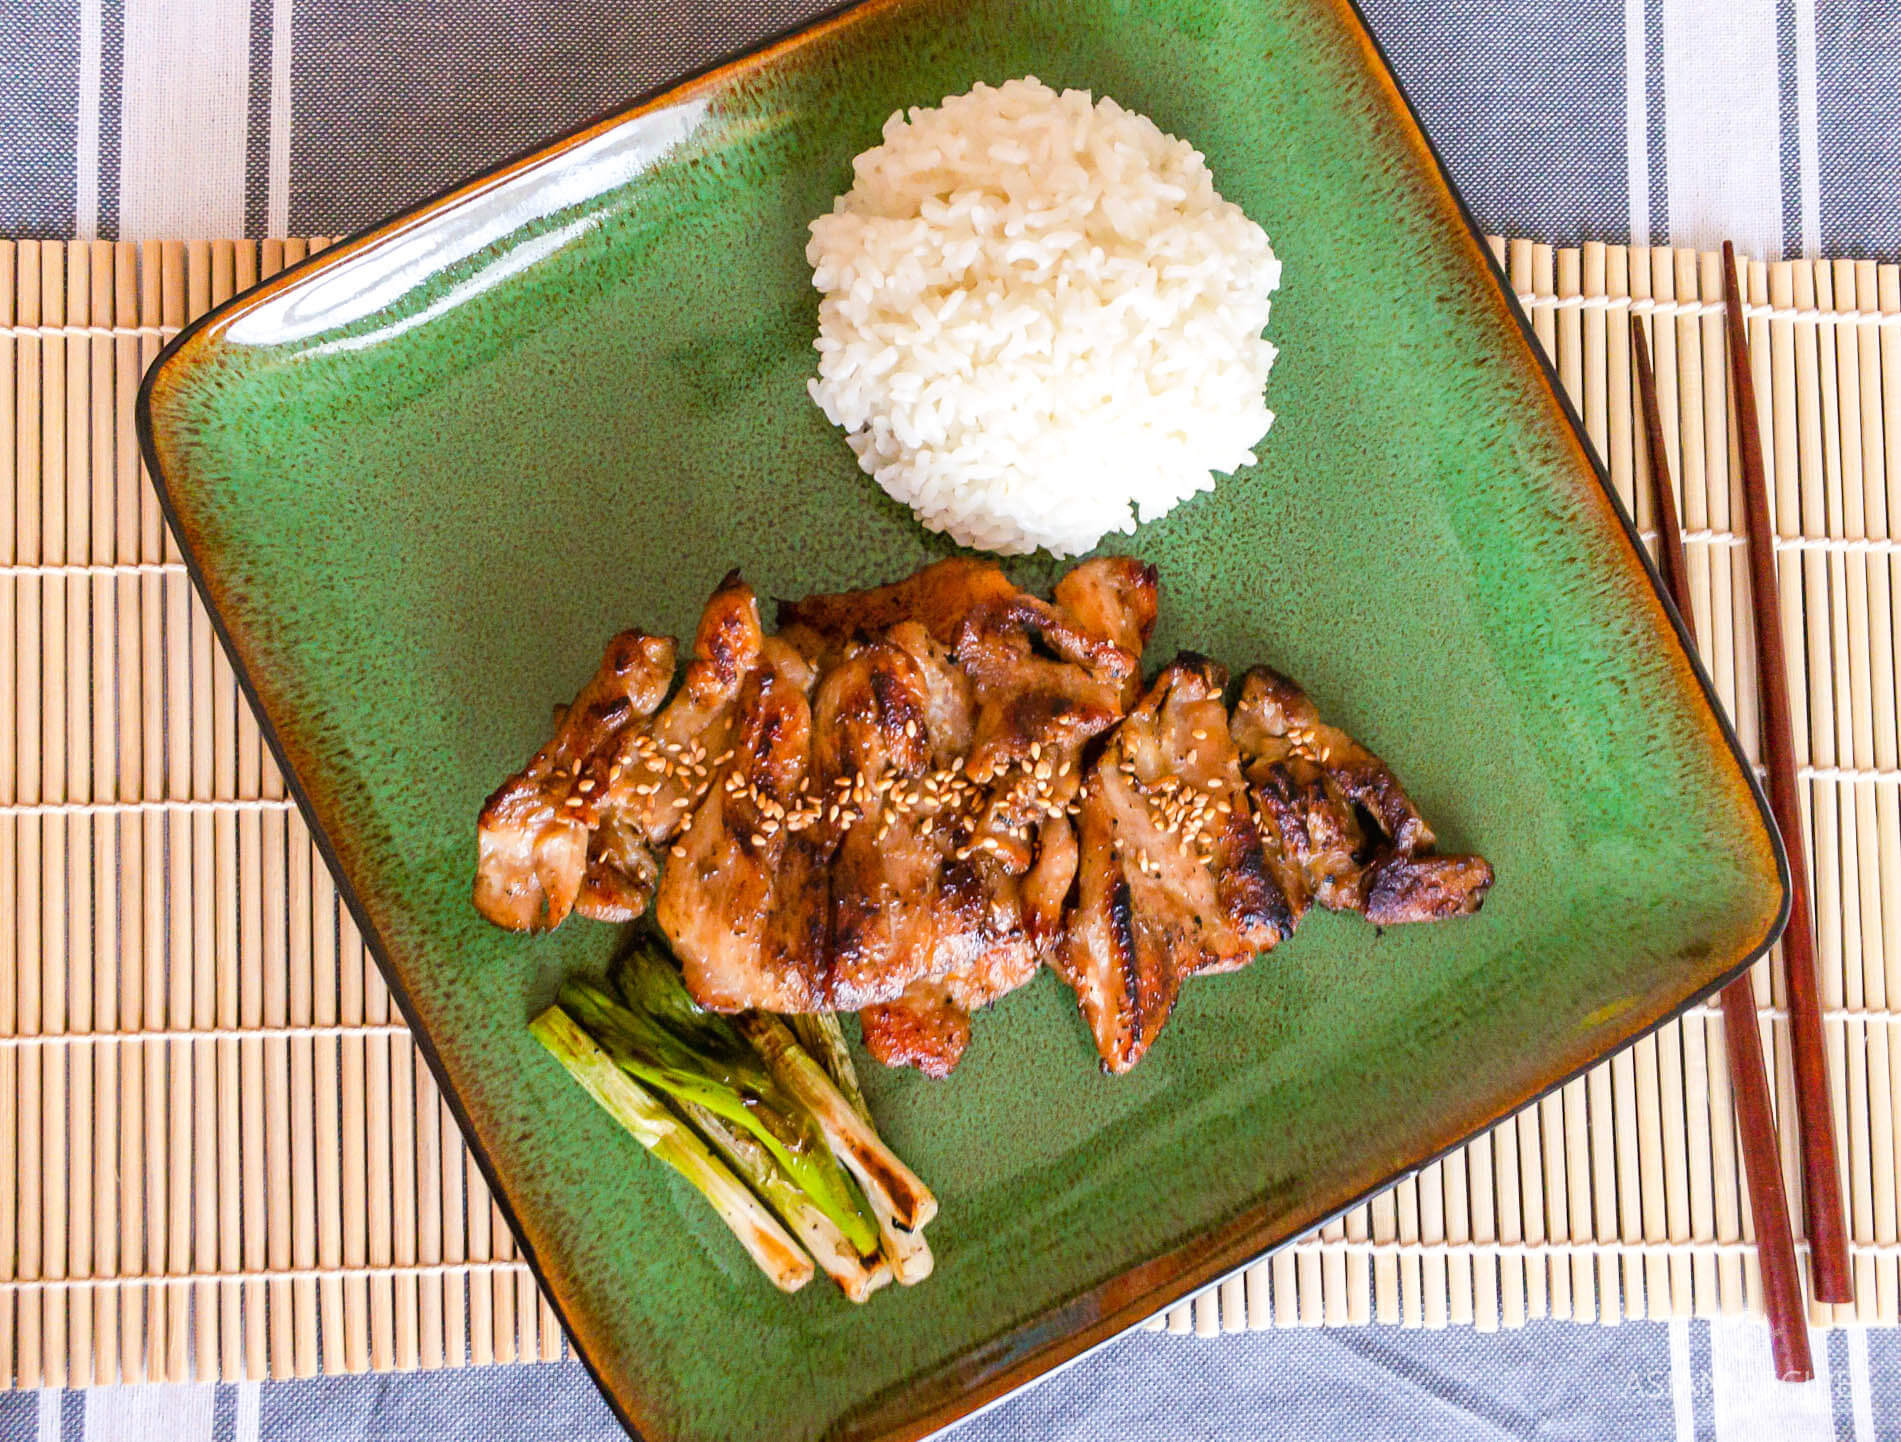 Our Korean-style chicken bulgogi is an easy, simple and delicious recipe that the whole family will love.